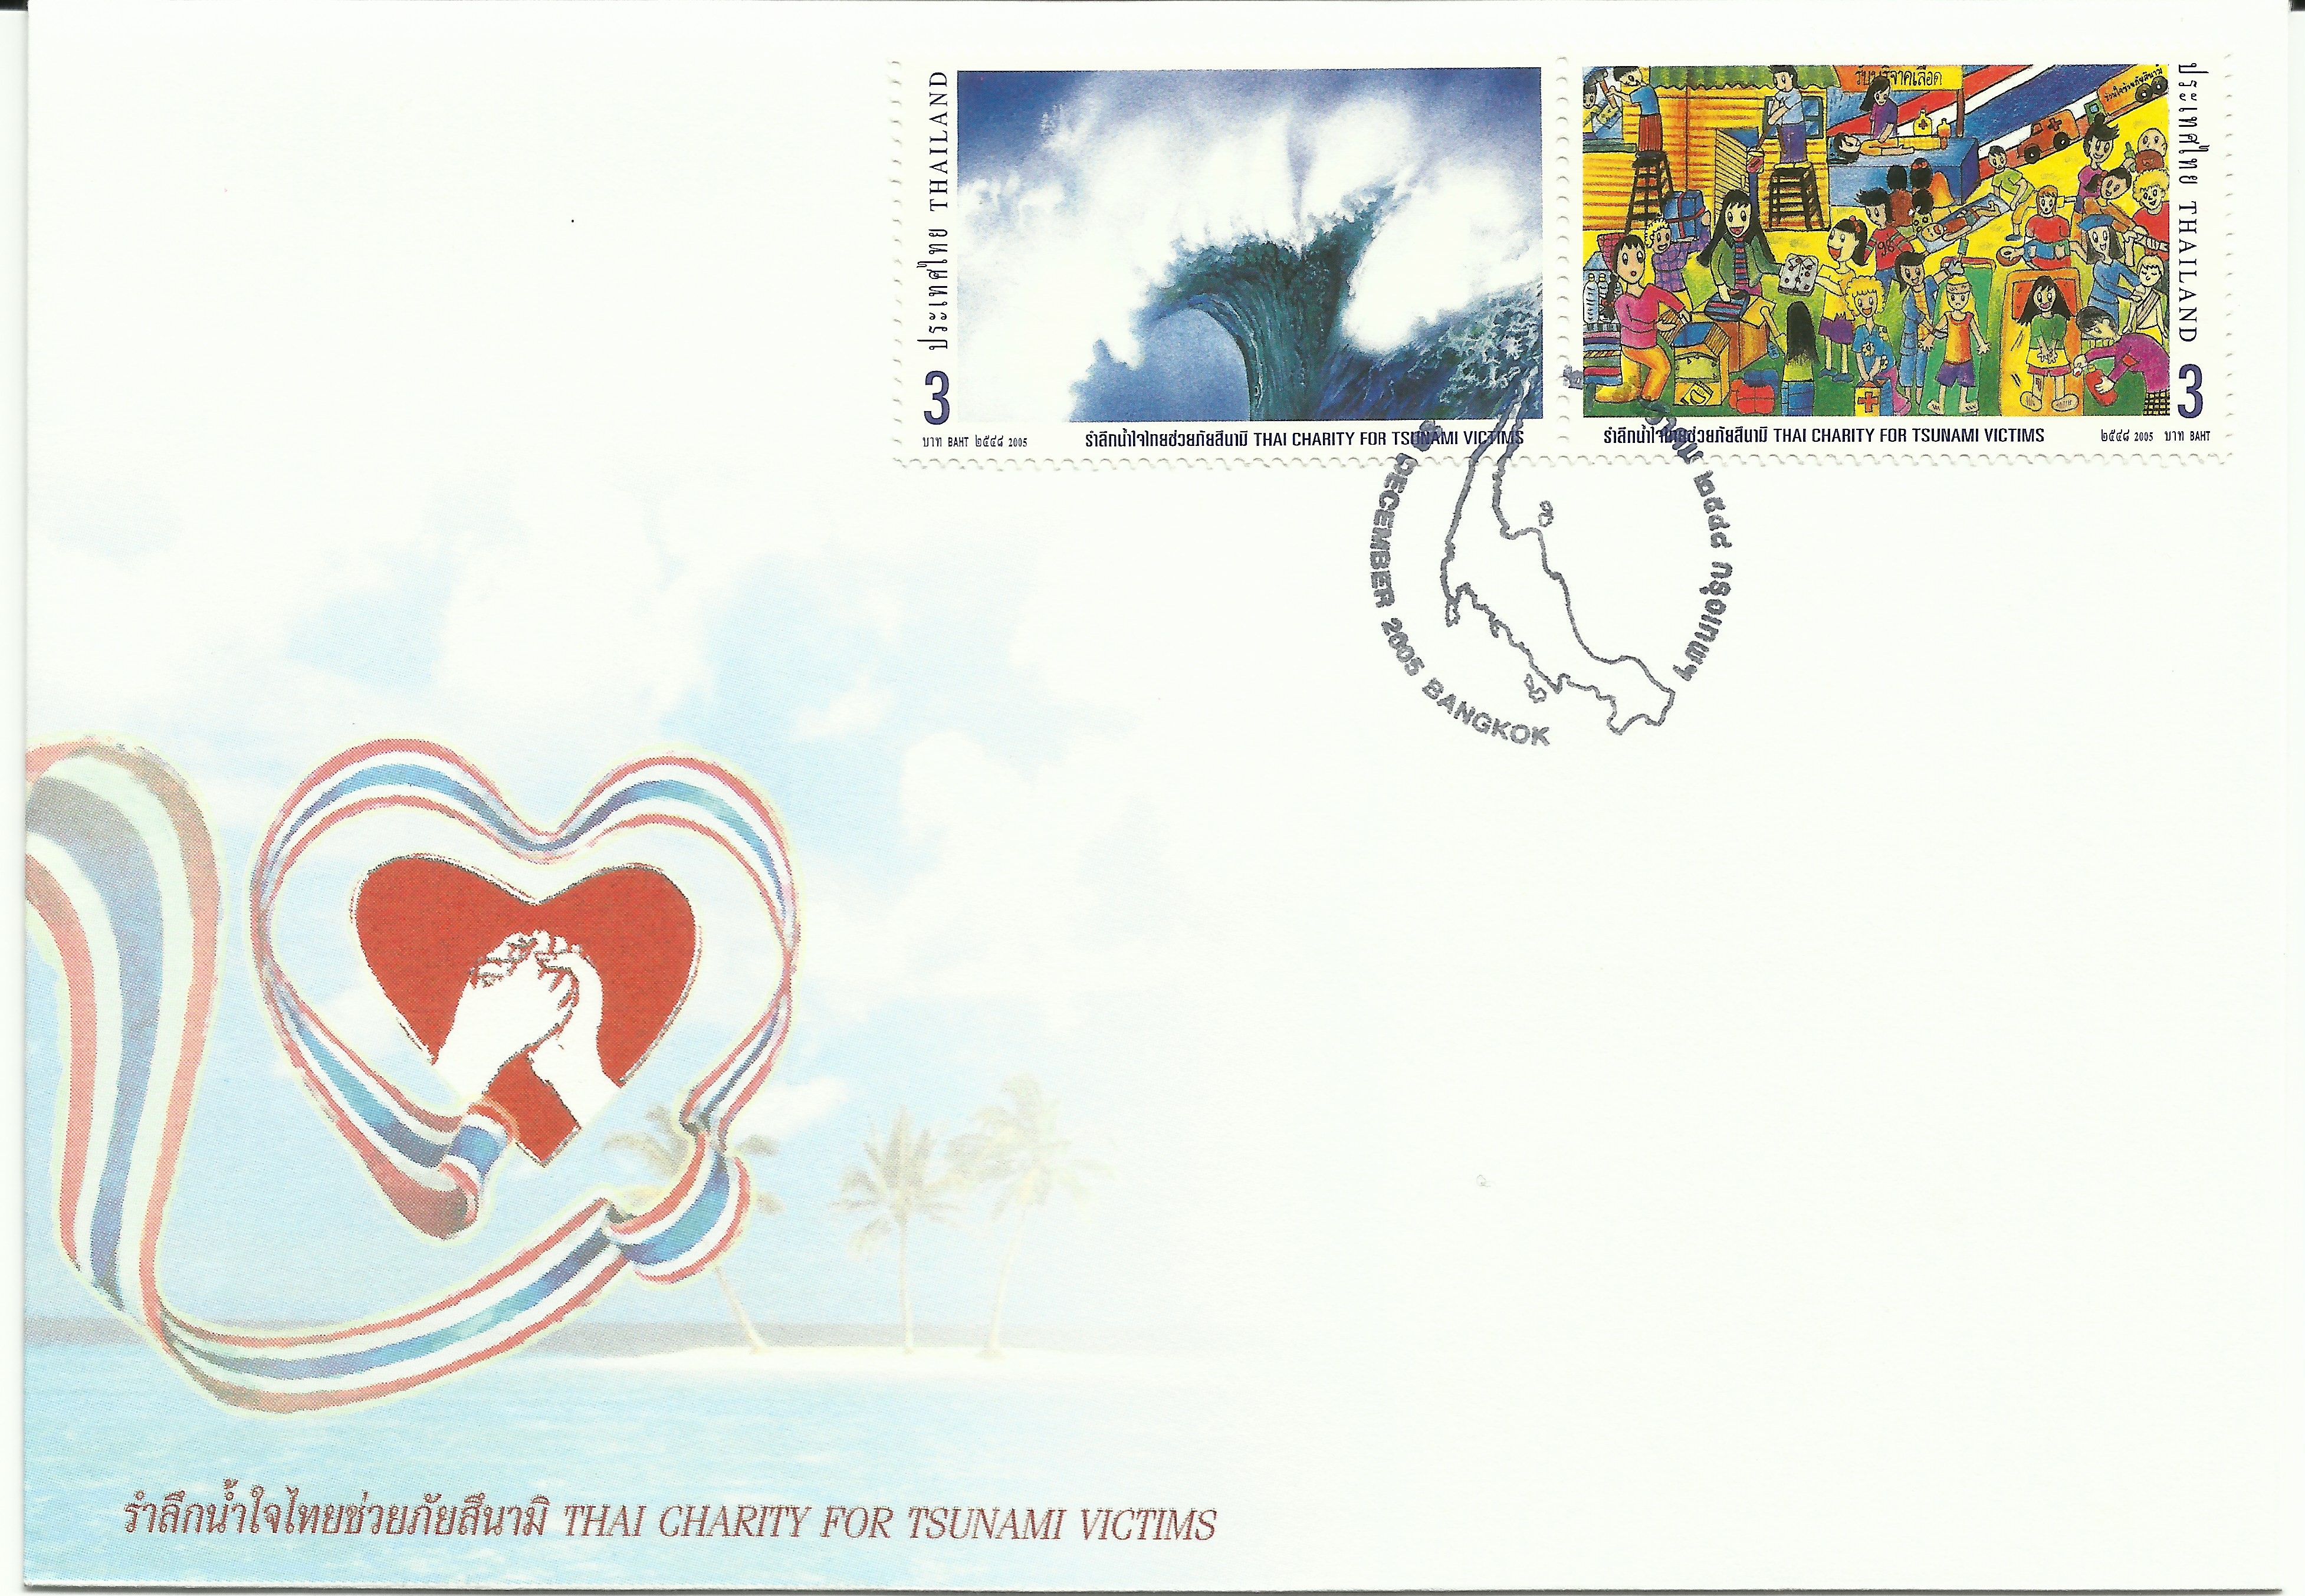 Thailand - Scott #2211 (2005) [first day cover - front]